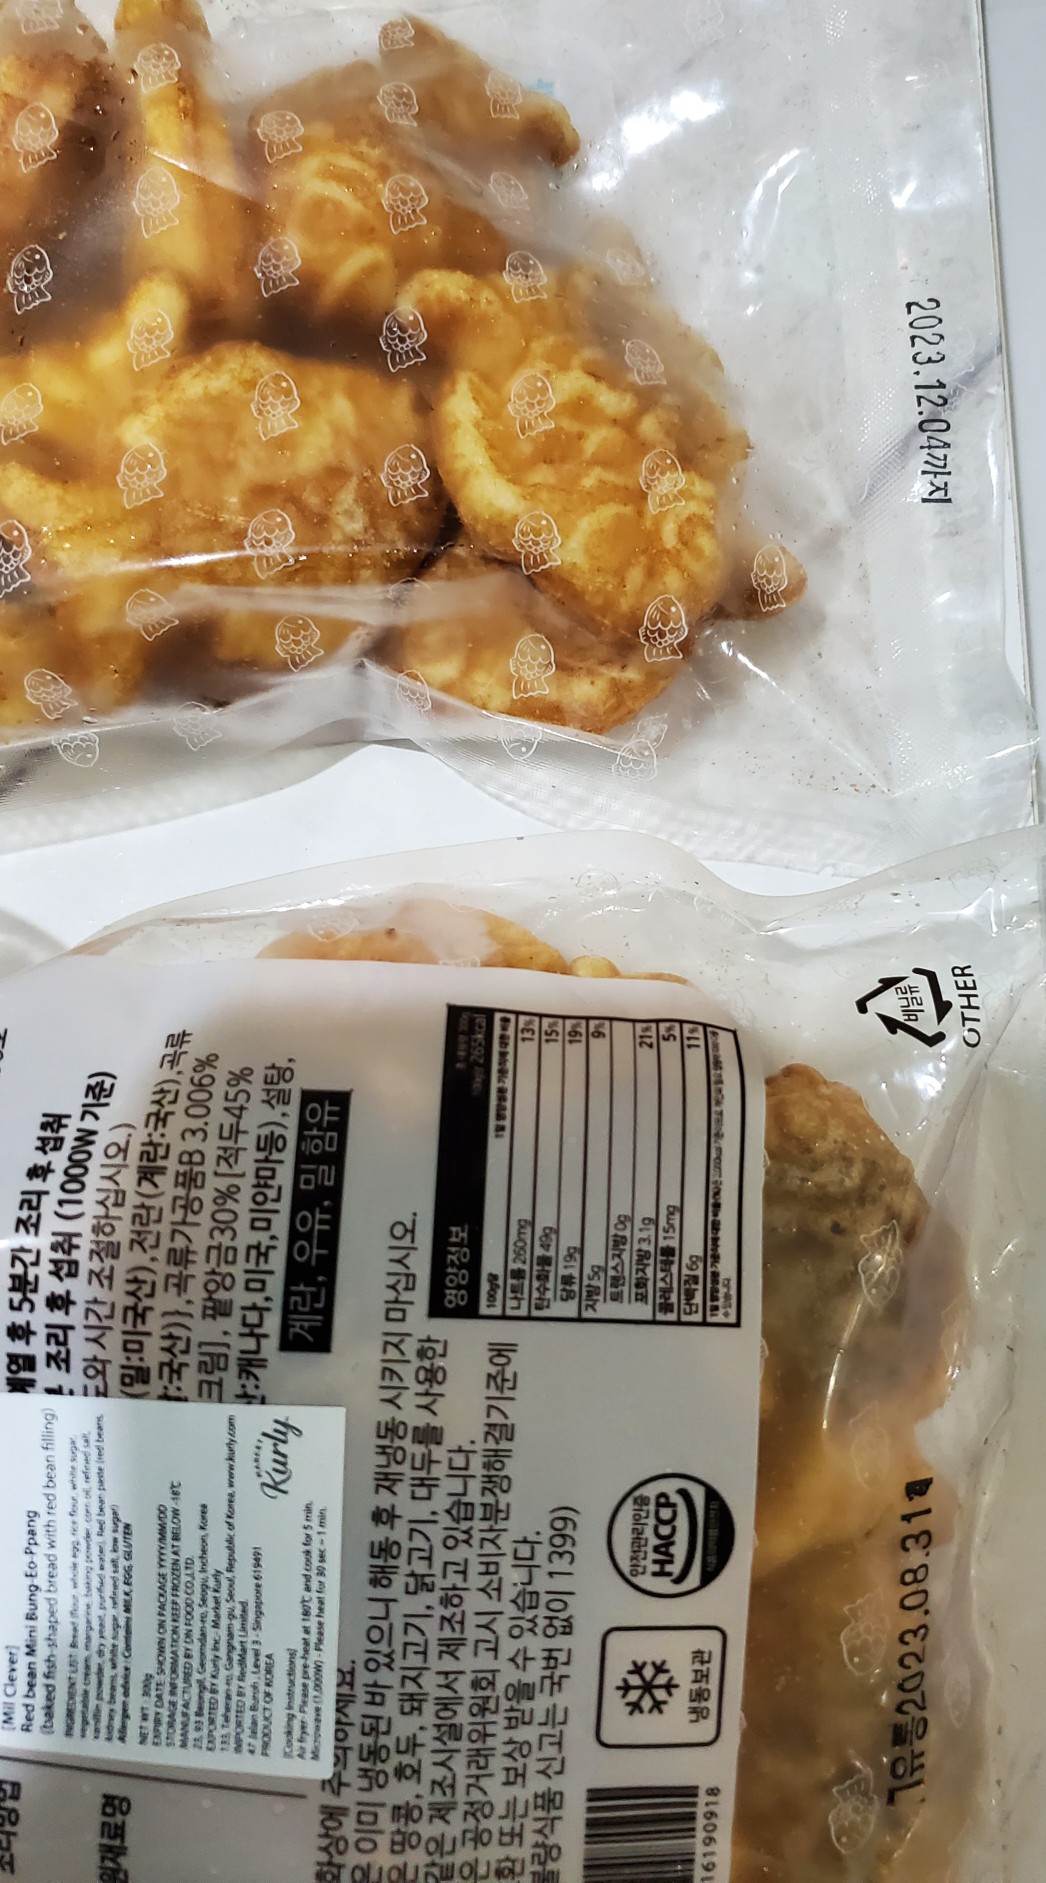 Market Kurly] Mil Clever Red Bean Mini Bungeoppang Baked Fish-Shaped Bread  - Frozen